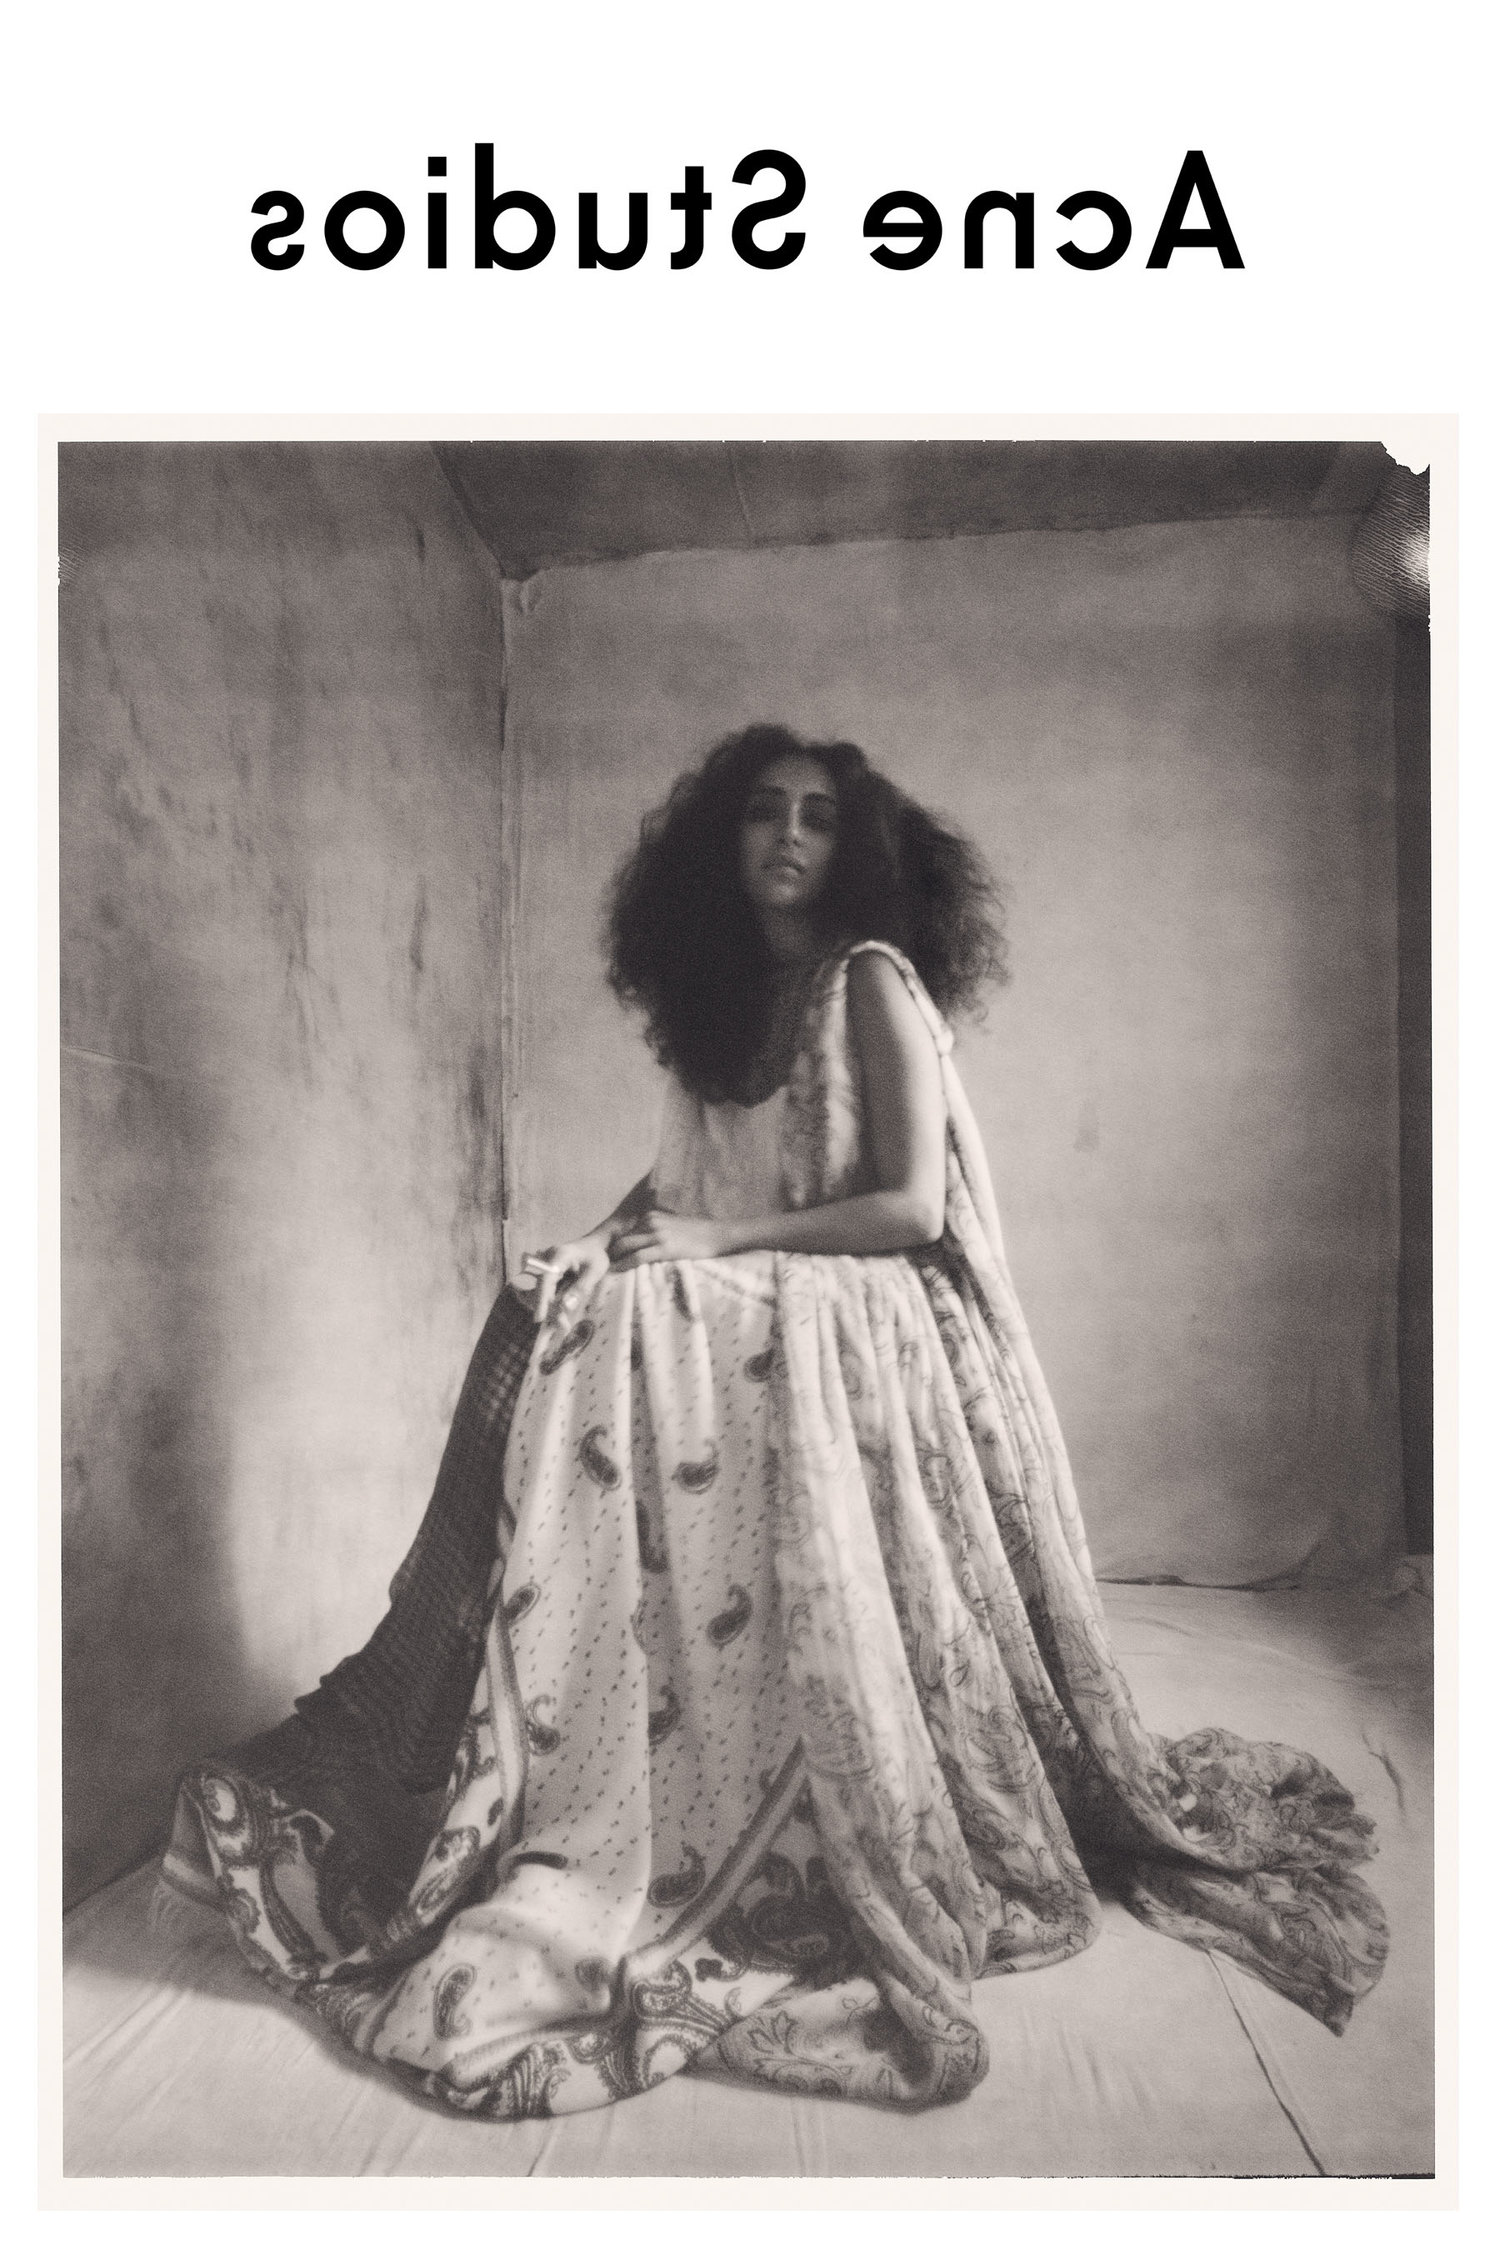 Paolo Roversi Photographs Artists from Around the World for Acne Studios —  anniversary magazine